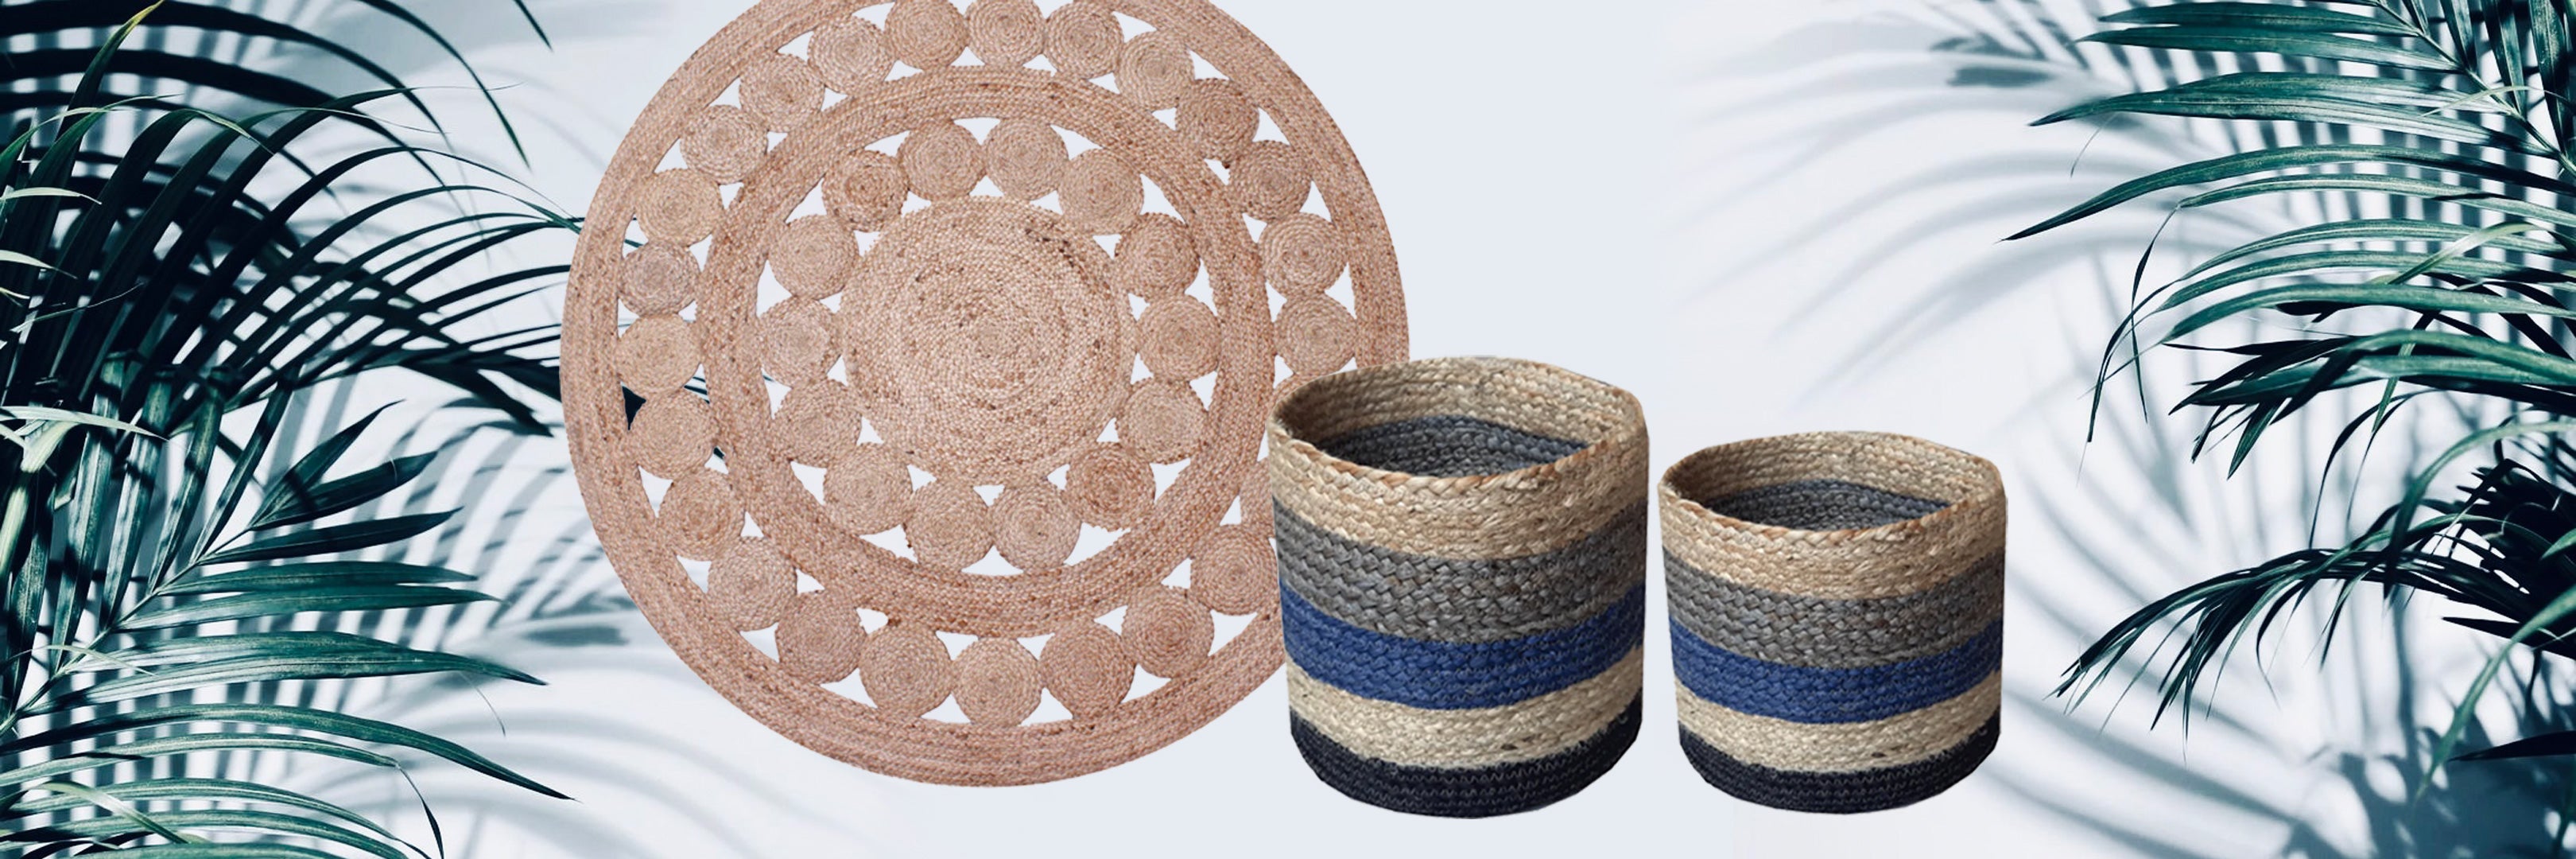 Jute natural round rug and jute stripe baskets in blue shades for a ethnic home style